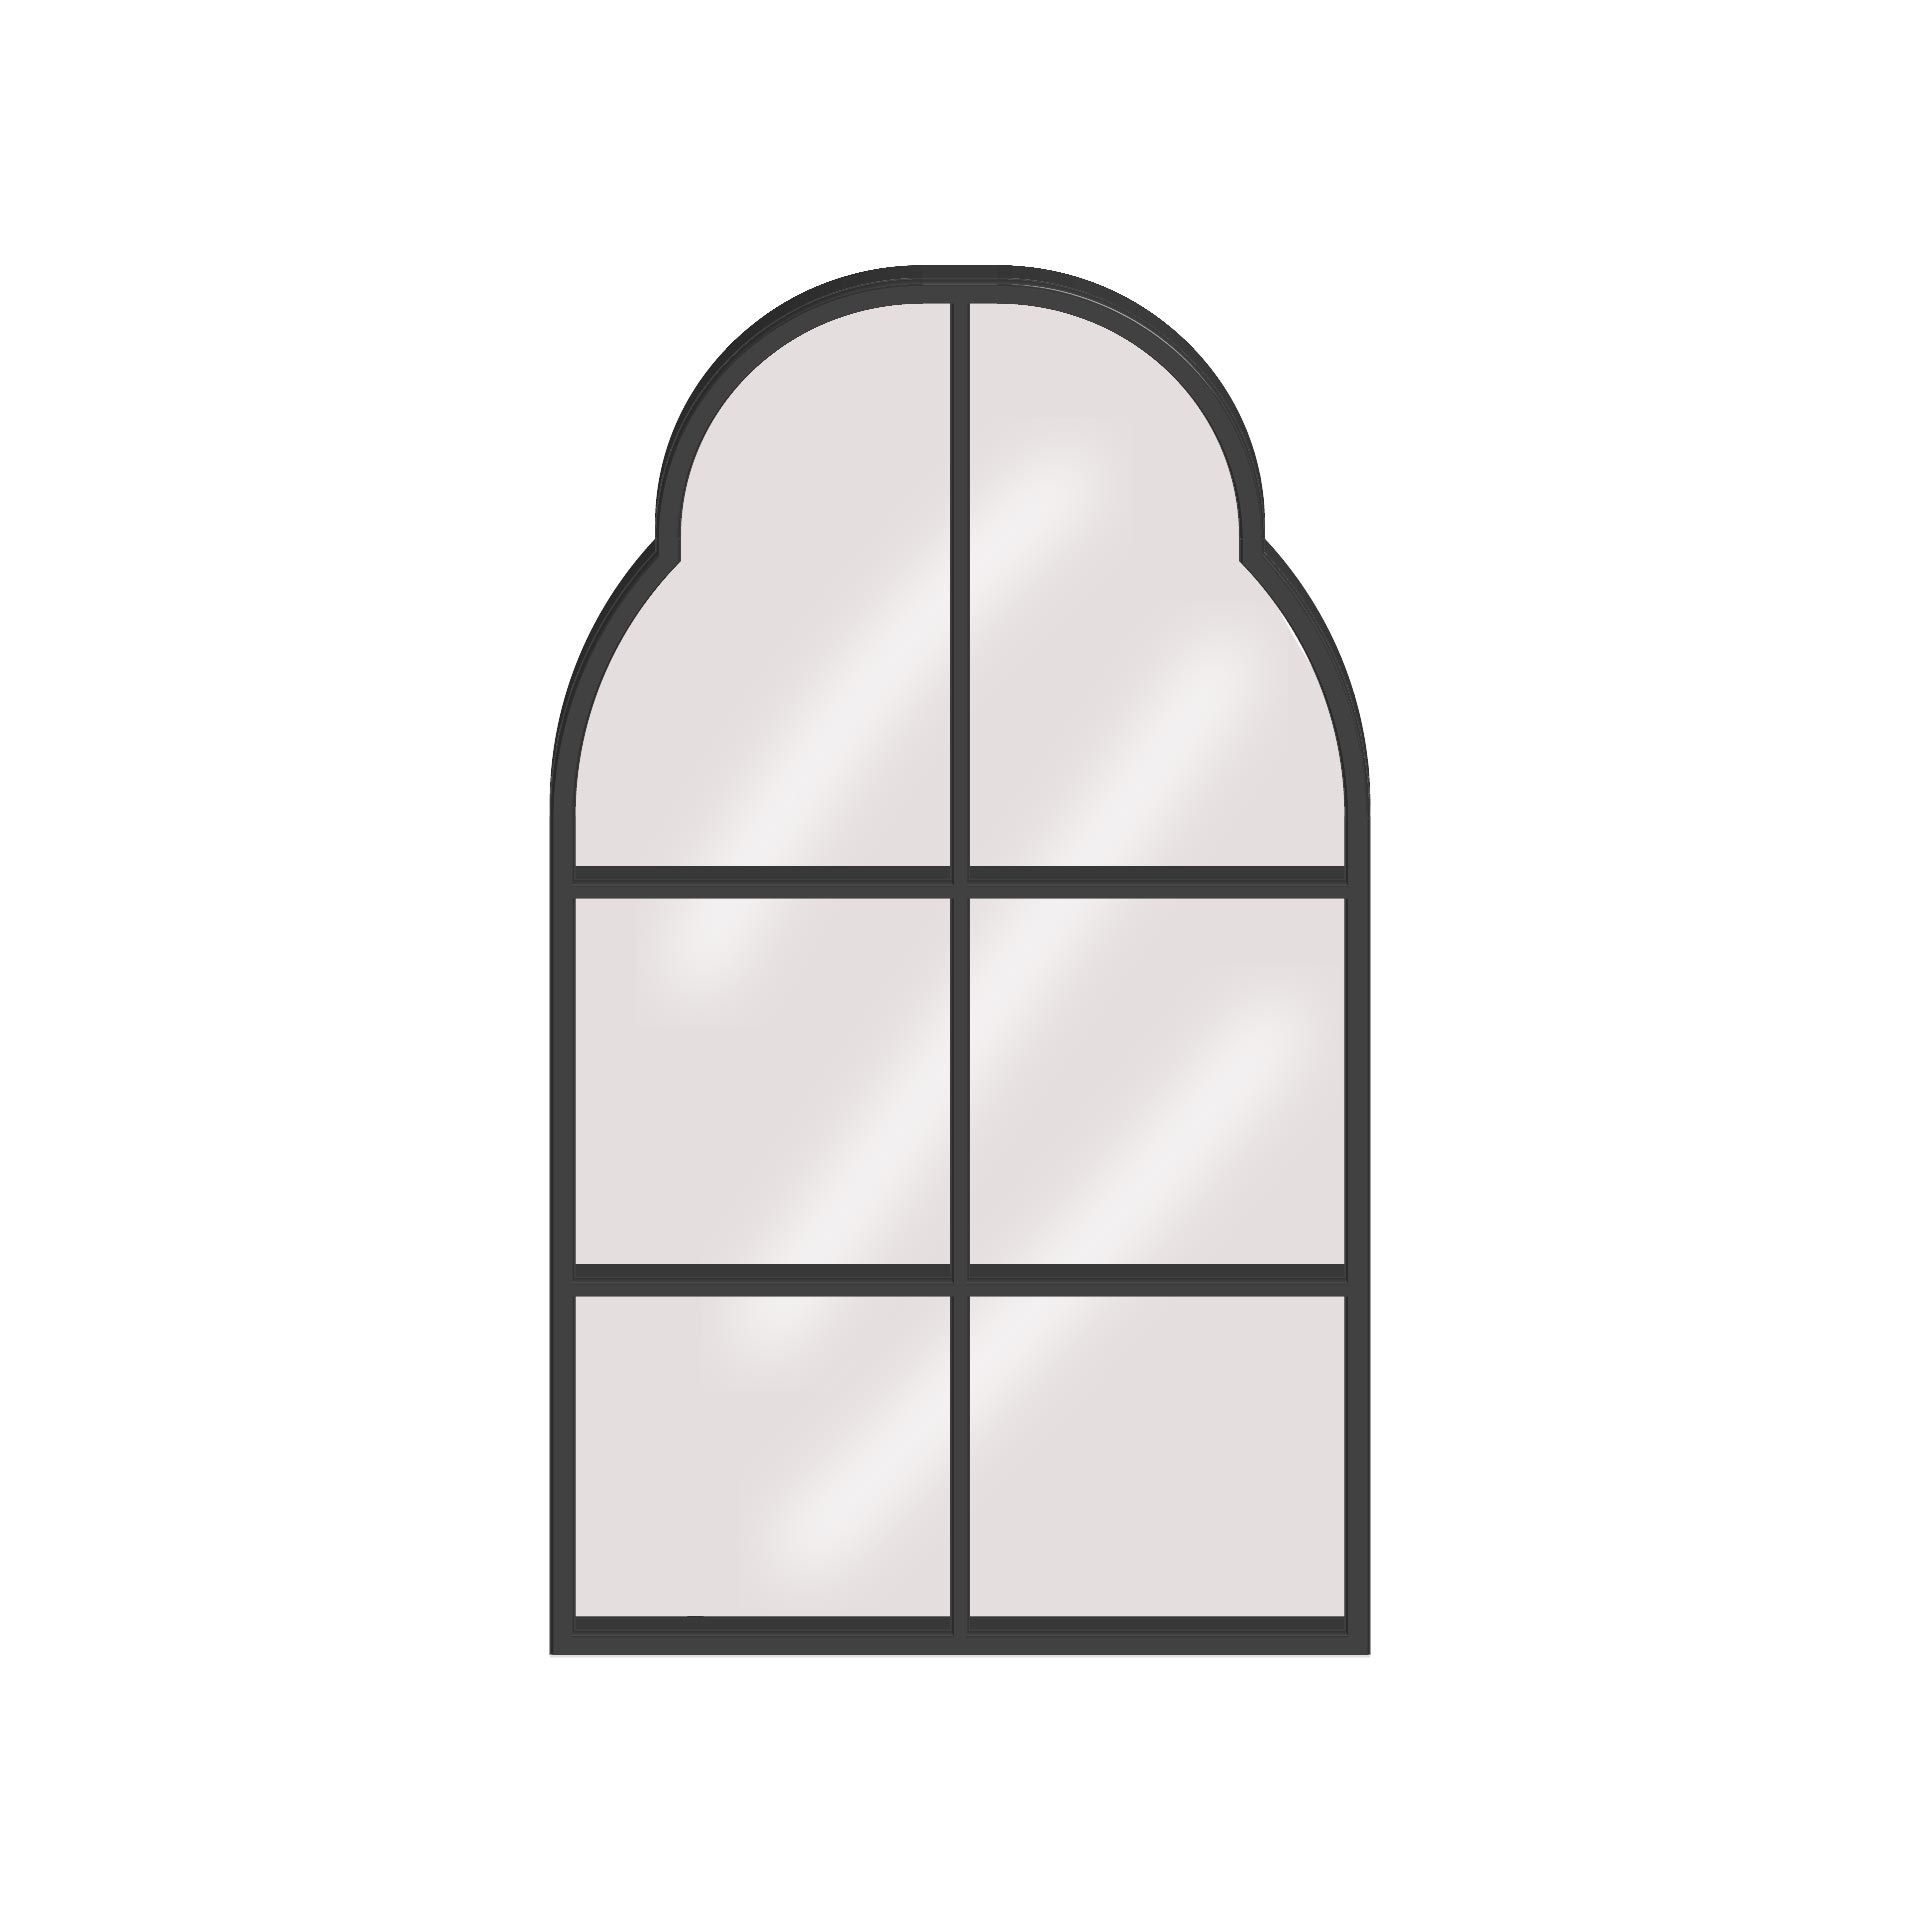 8 Best Images of Window Template Printable Stained Glass Window